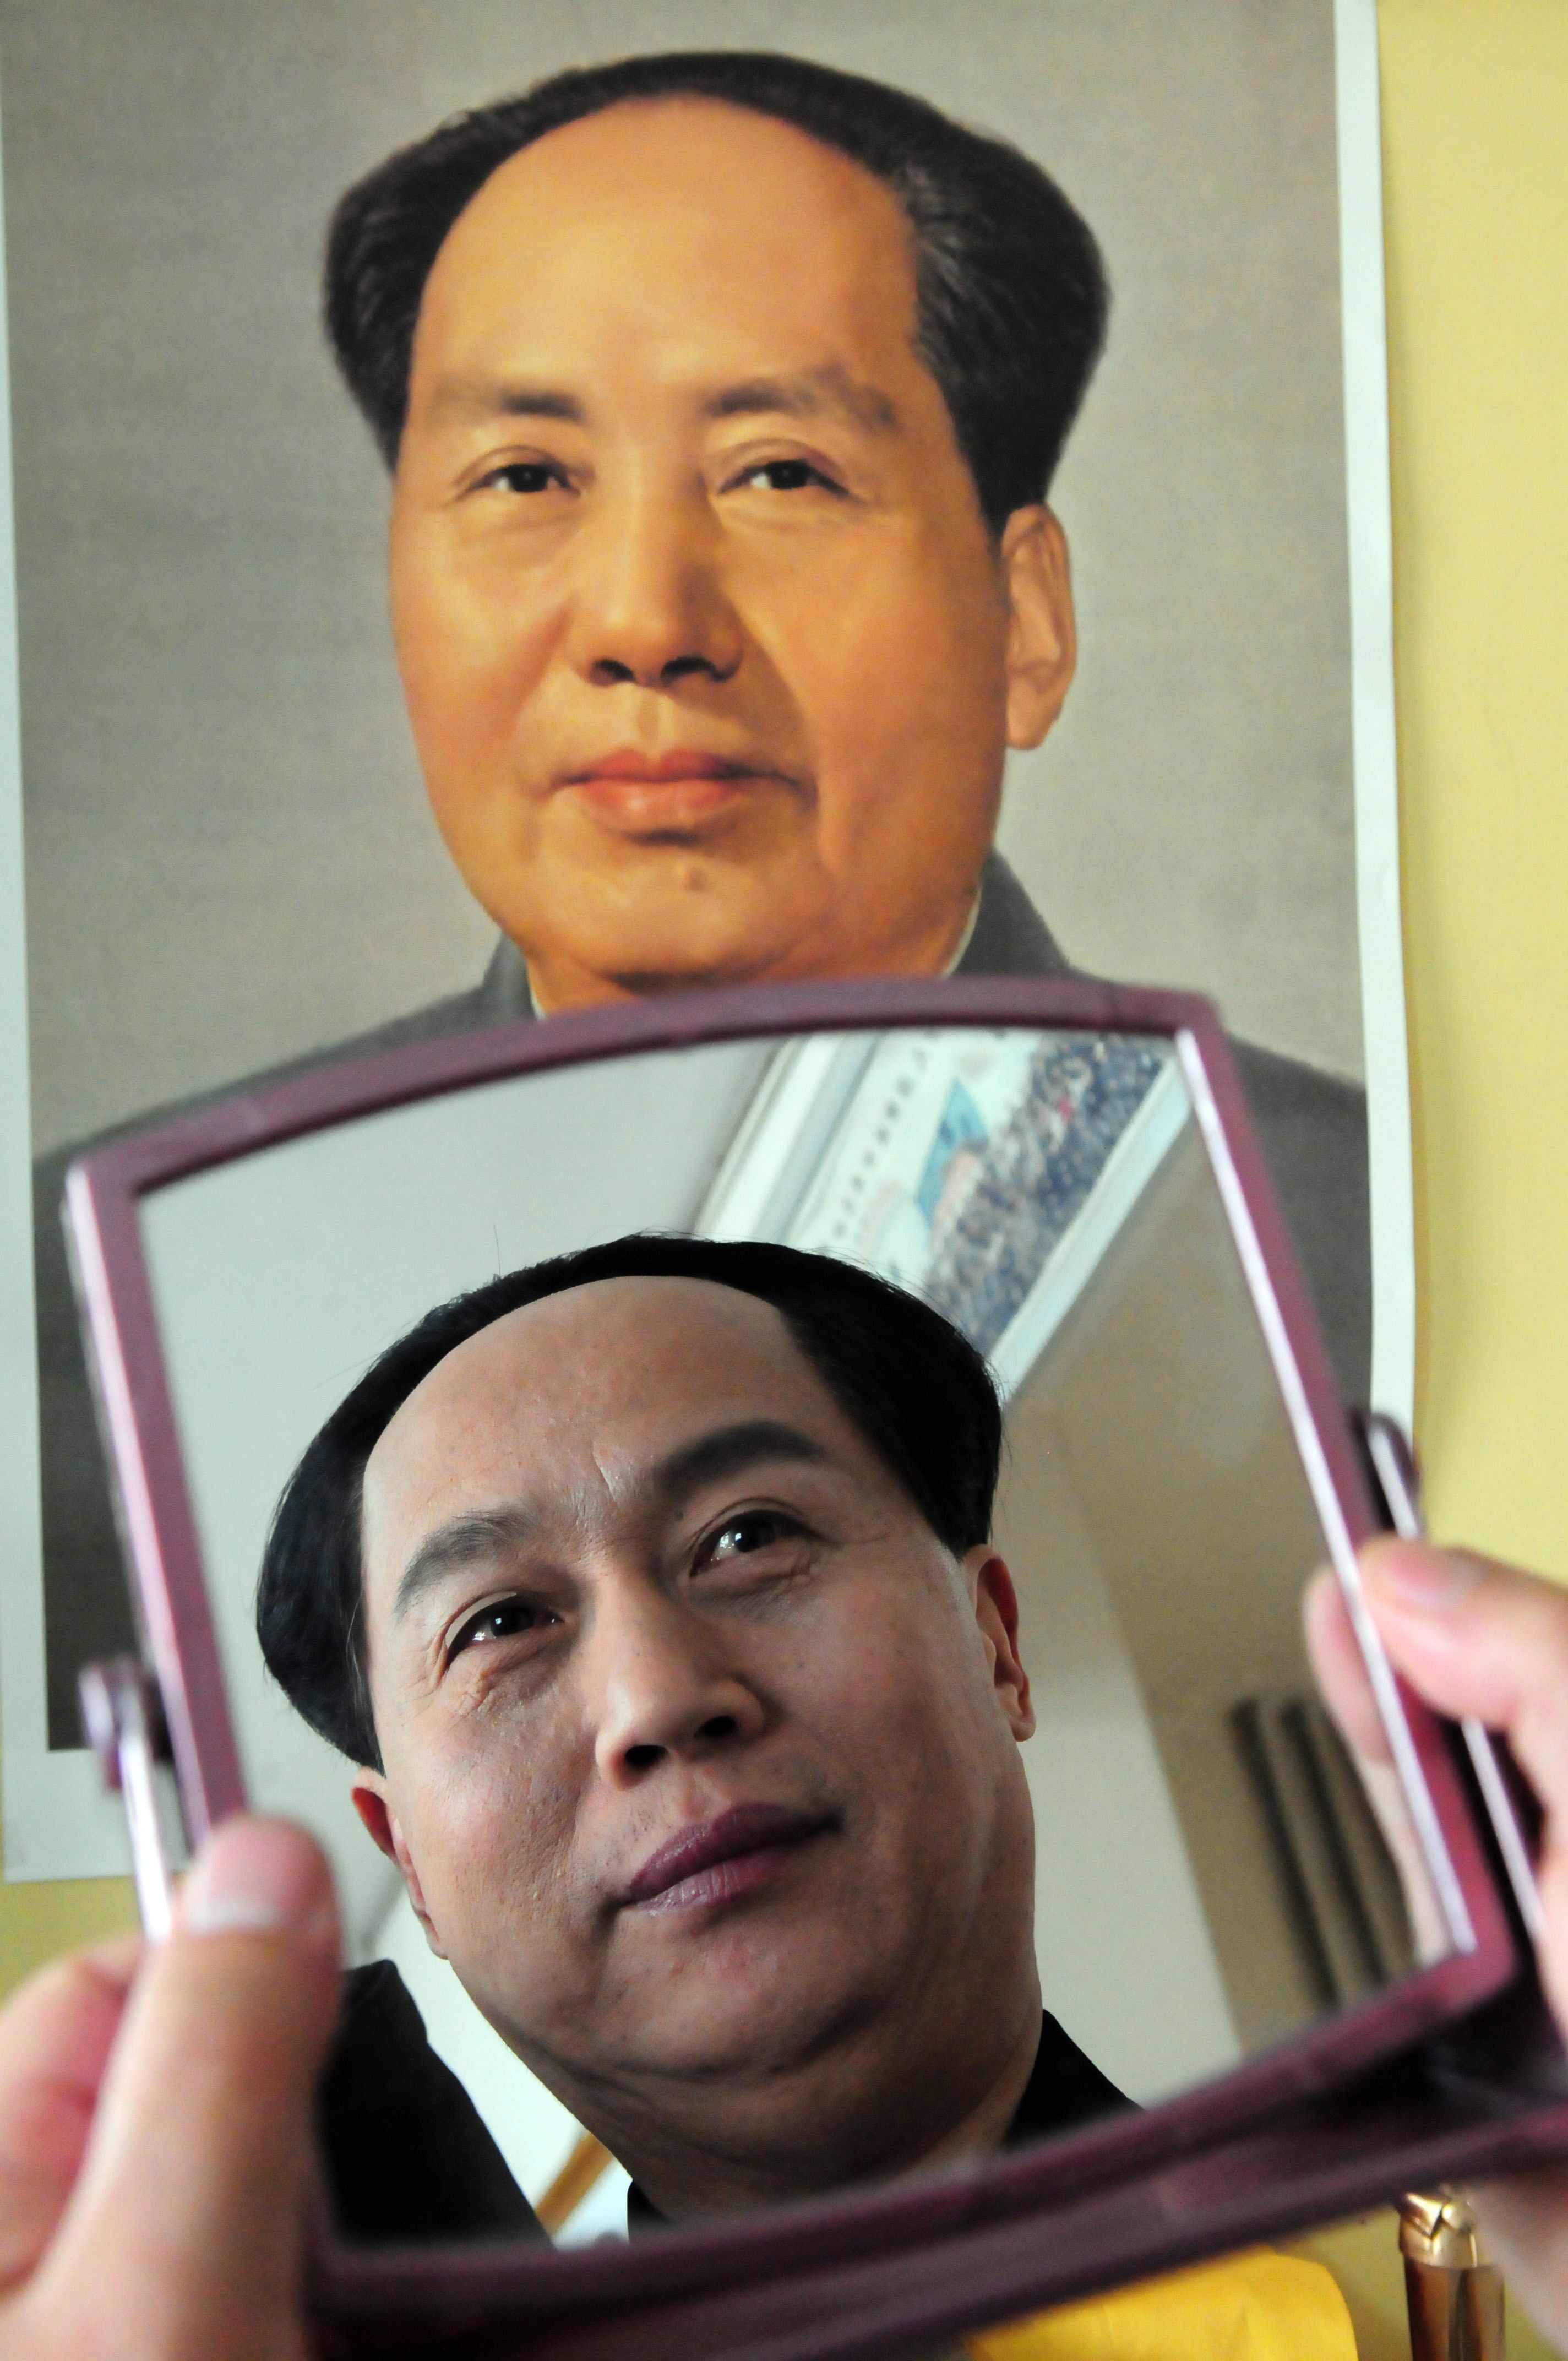 Where and why did Mao Zedong gain power?